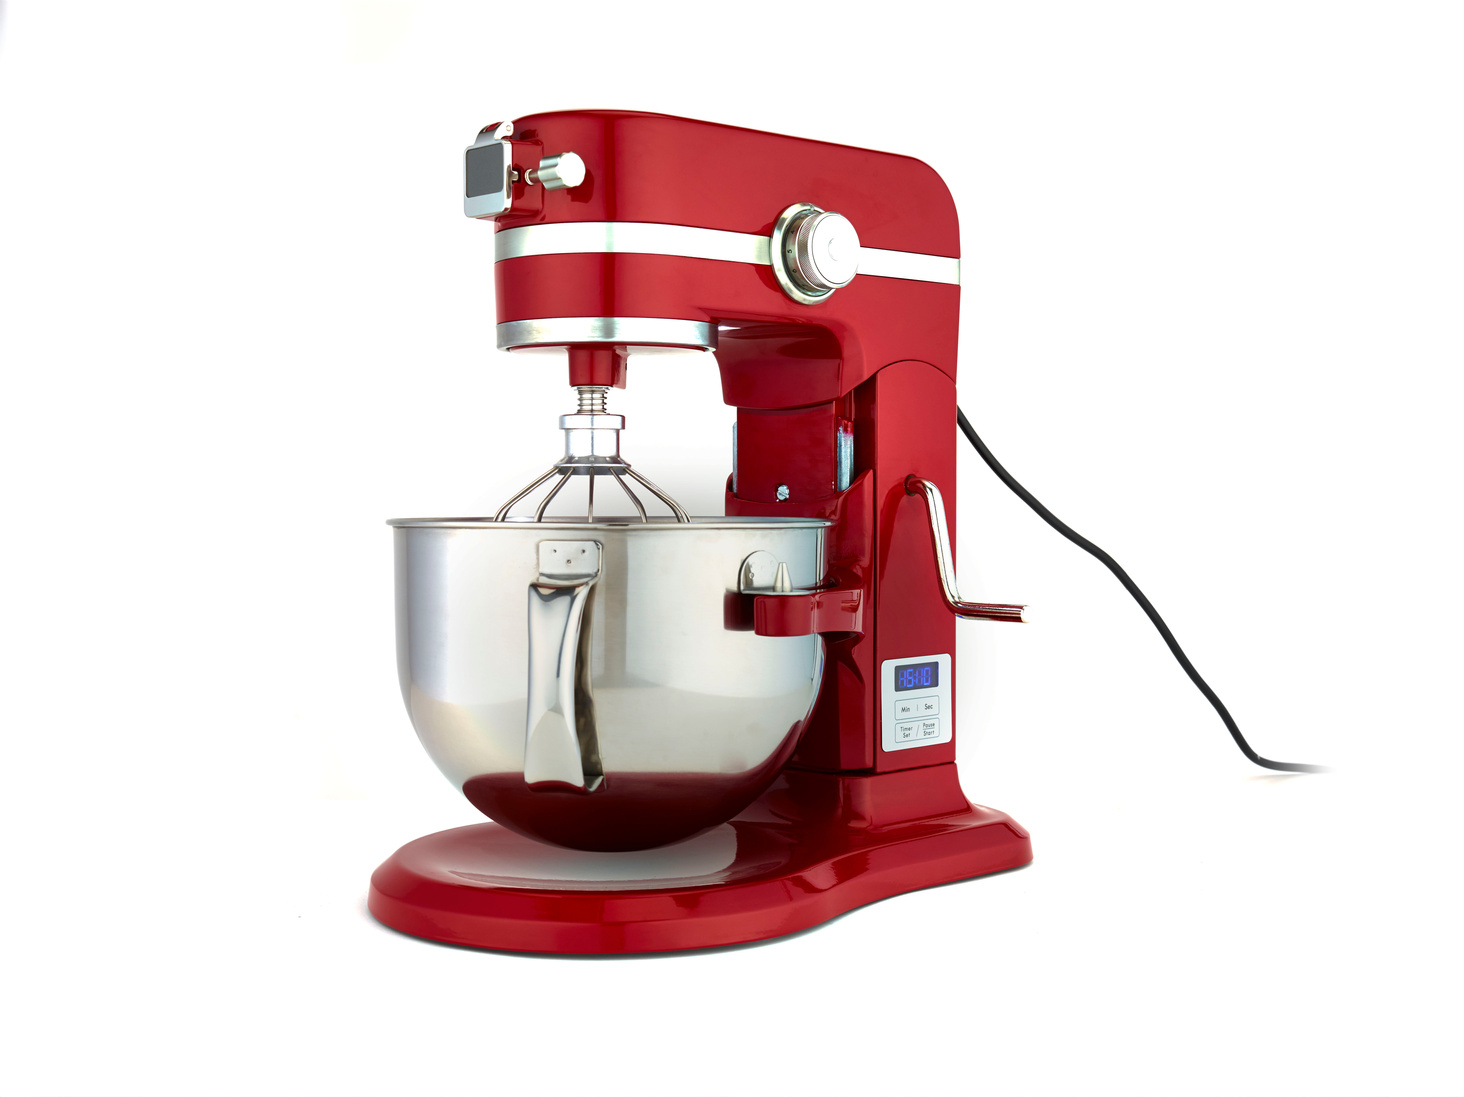 Electrical stand mixer in red color